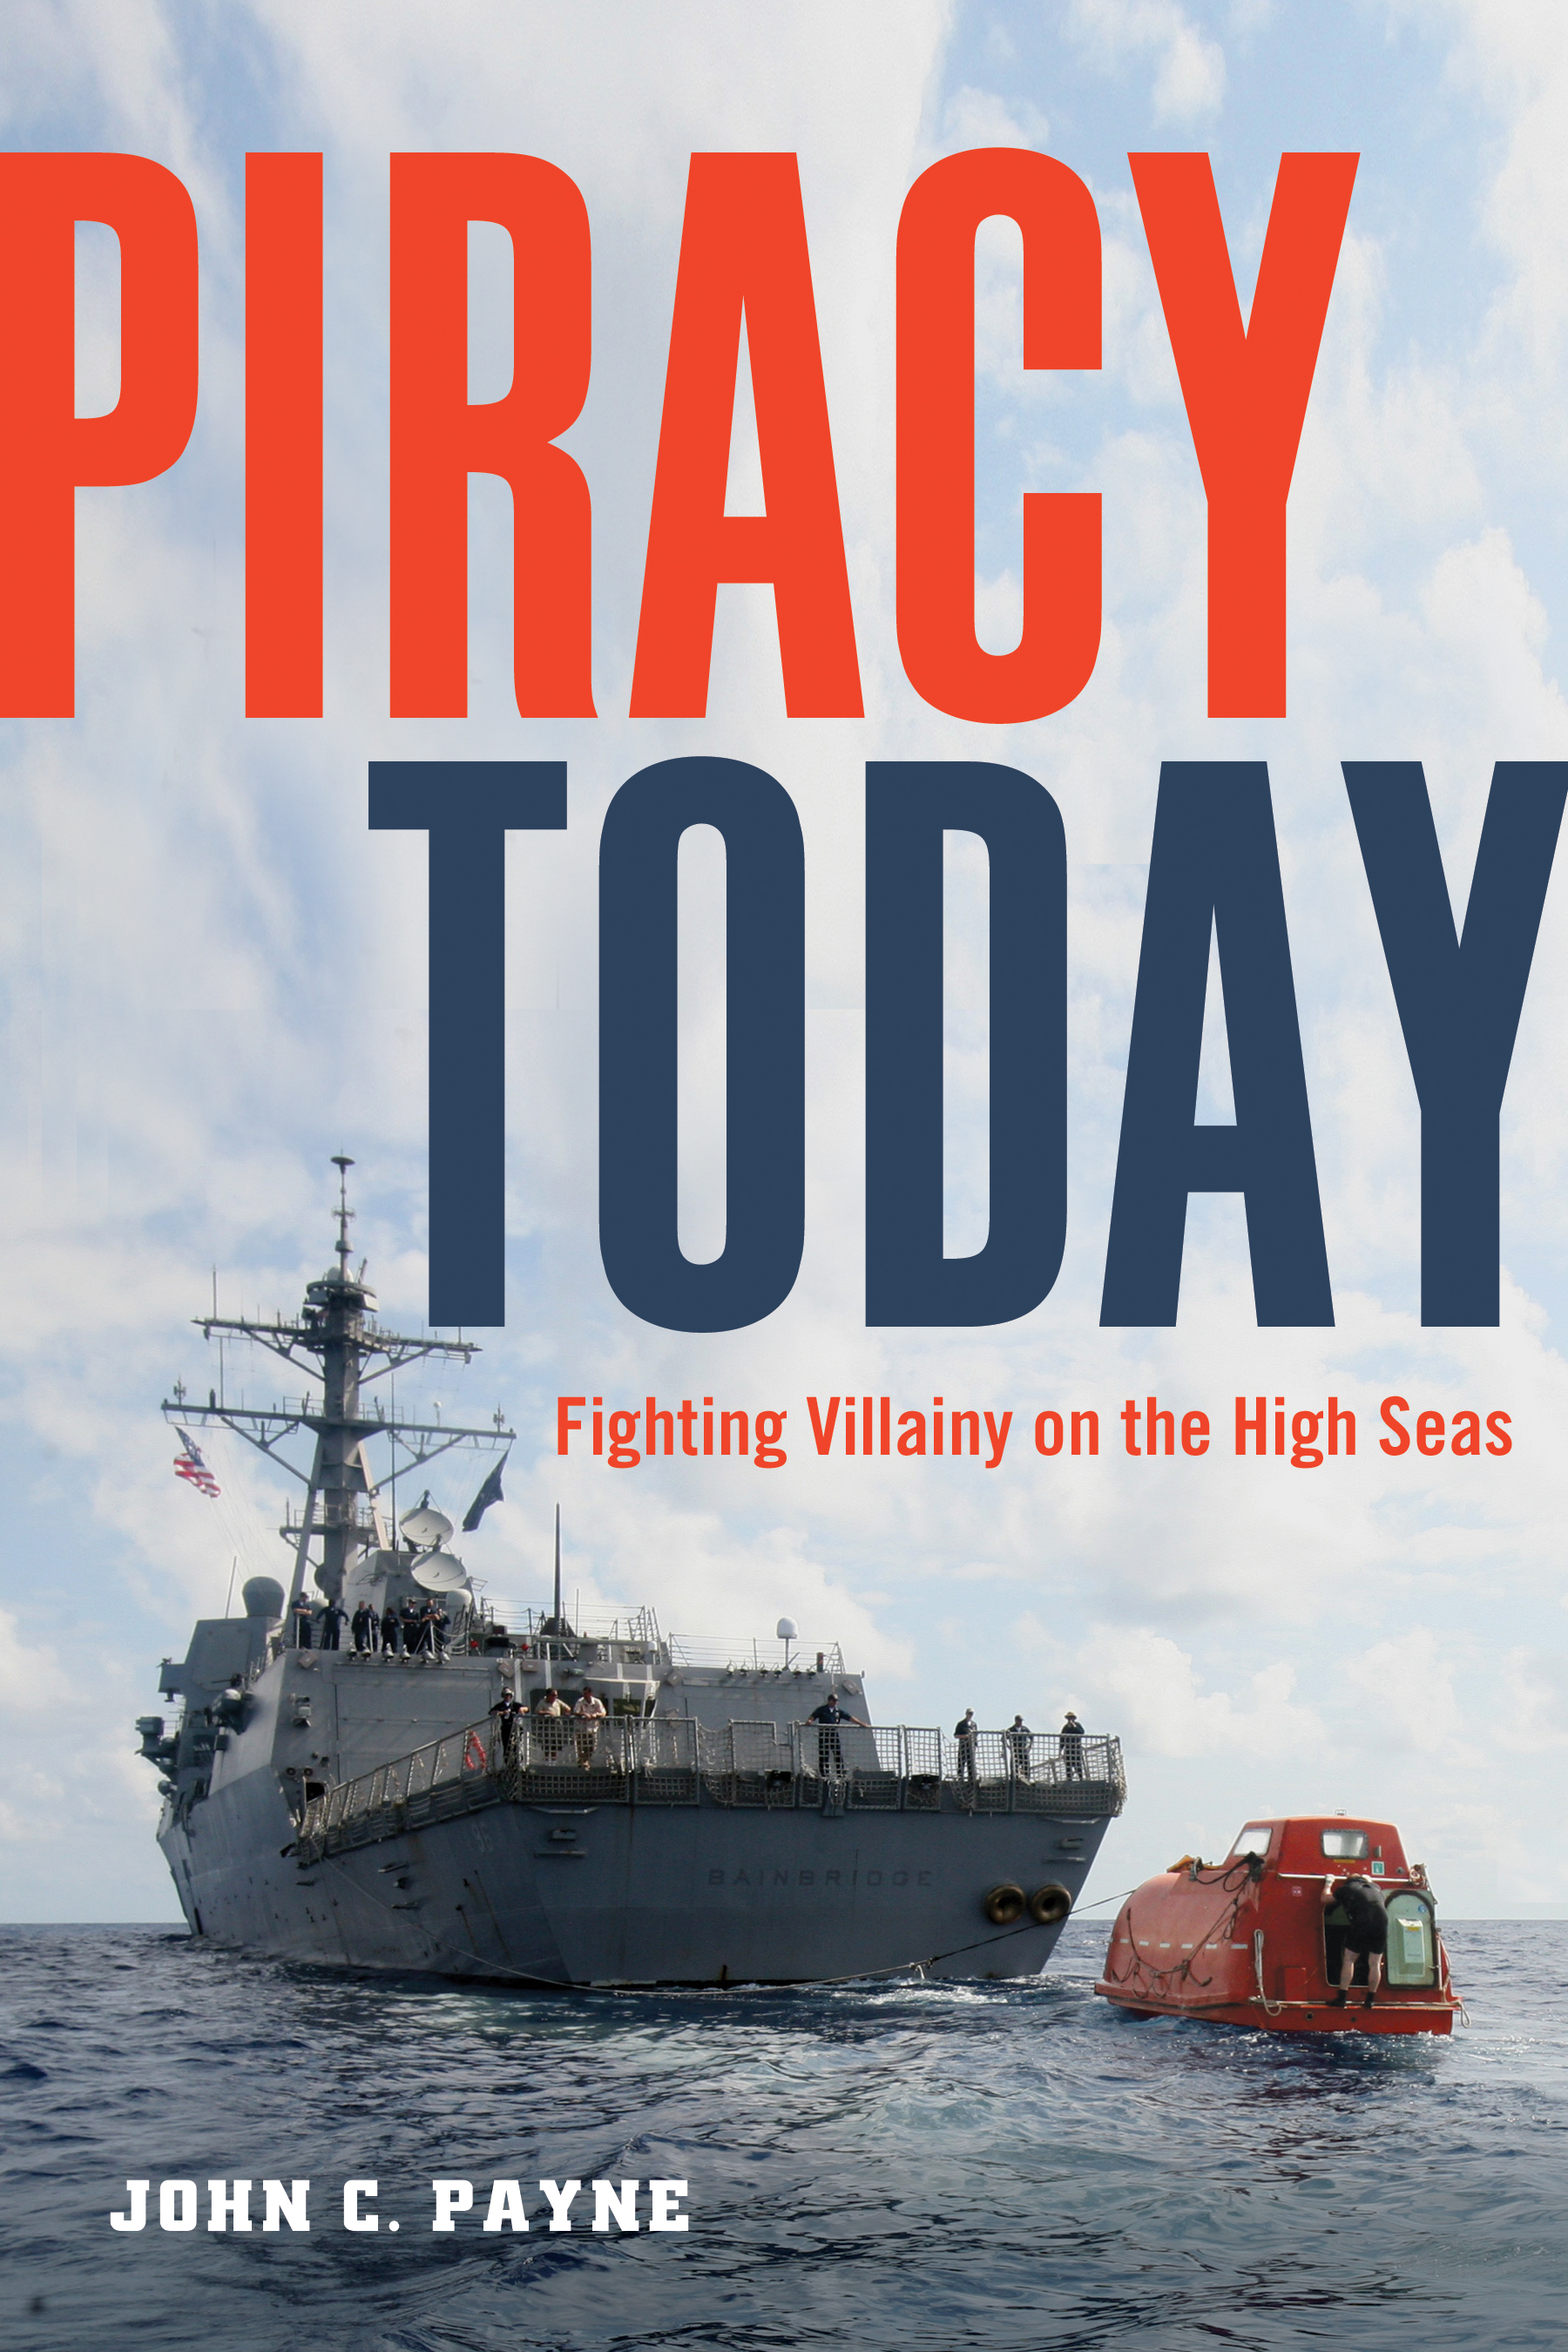 All about piracy in my bestselling book about modern piracy